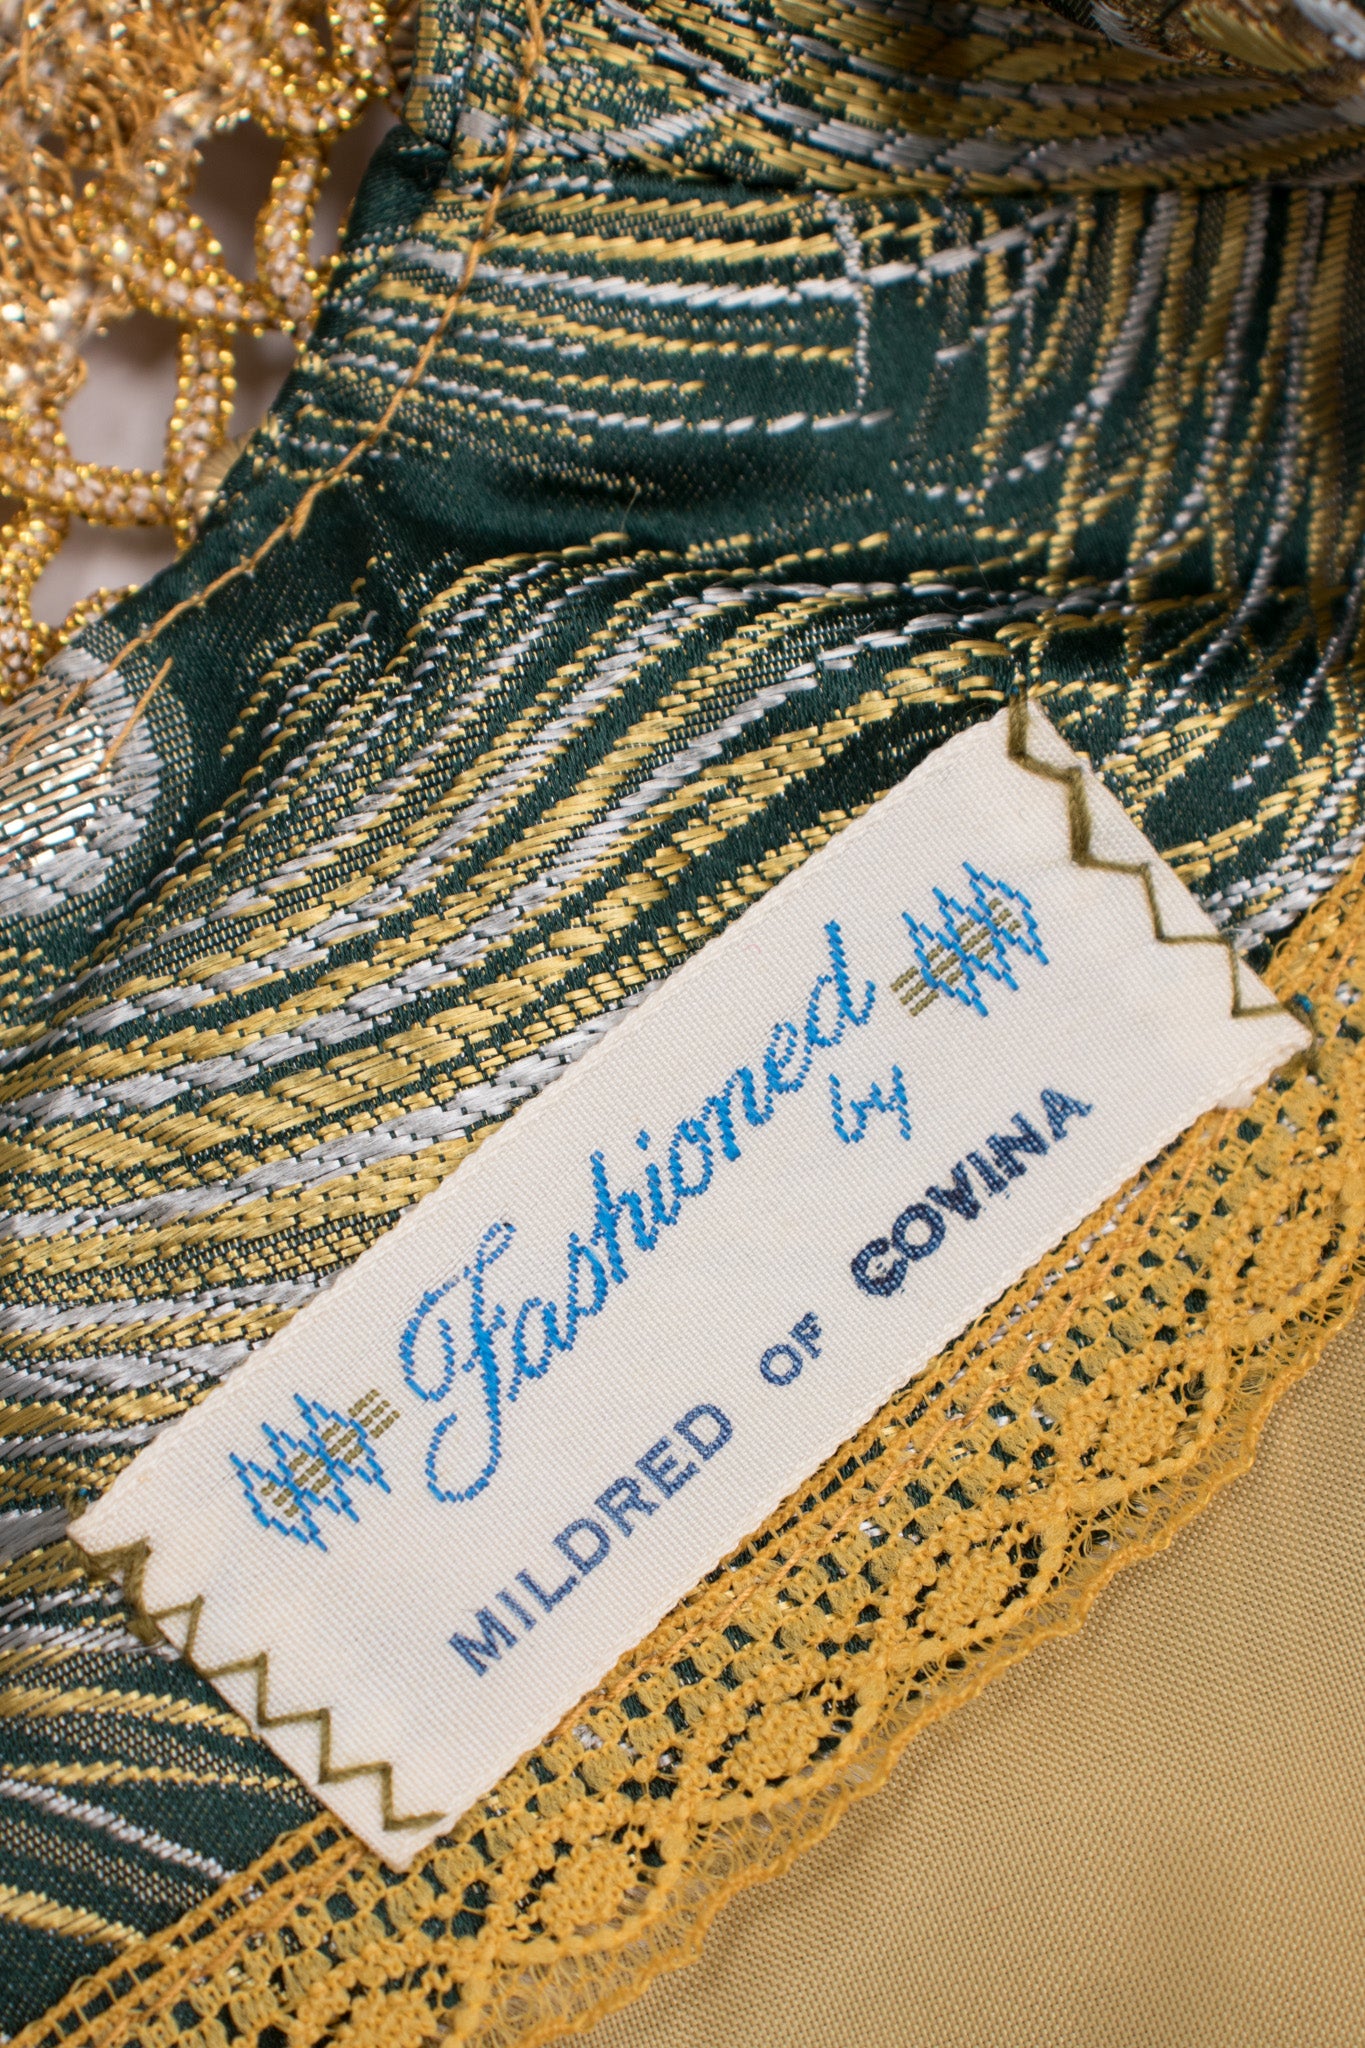 Fashioned by Mildred of Covina Emerald Gold Metallic Brocade Peacock Dress